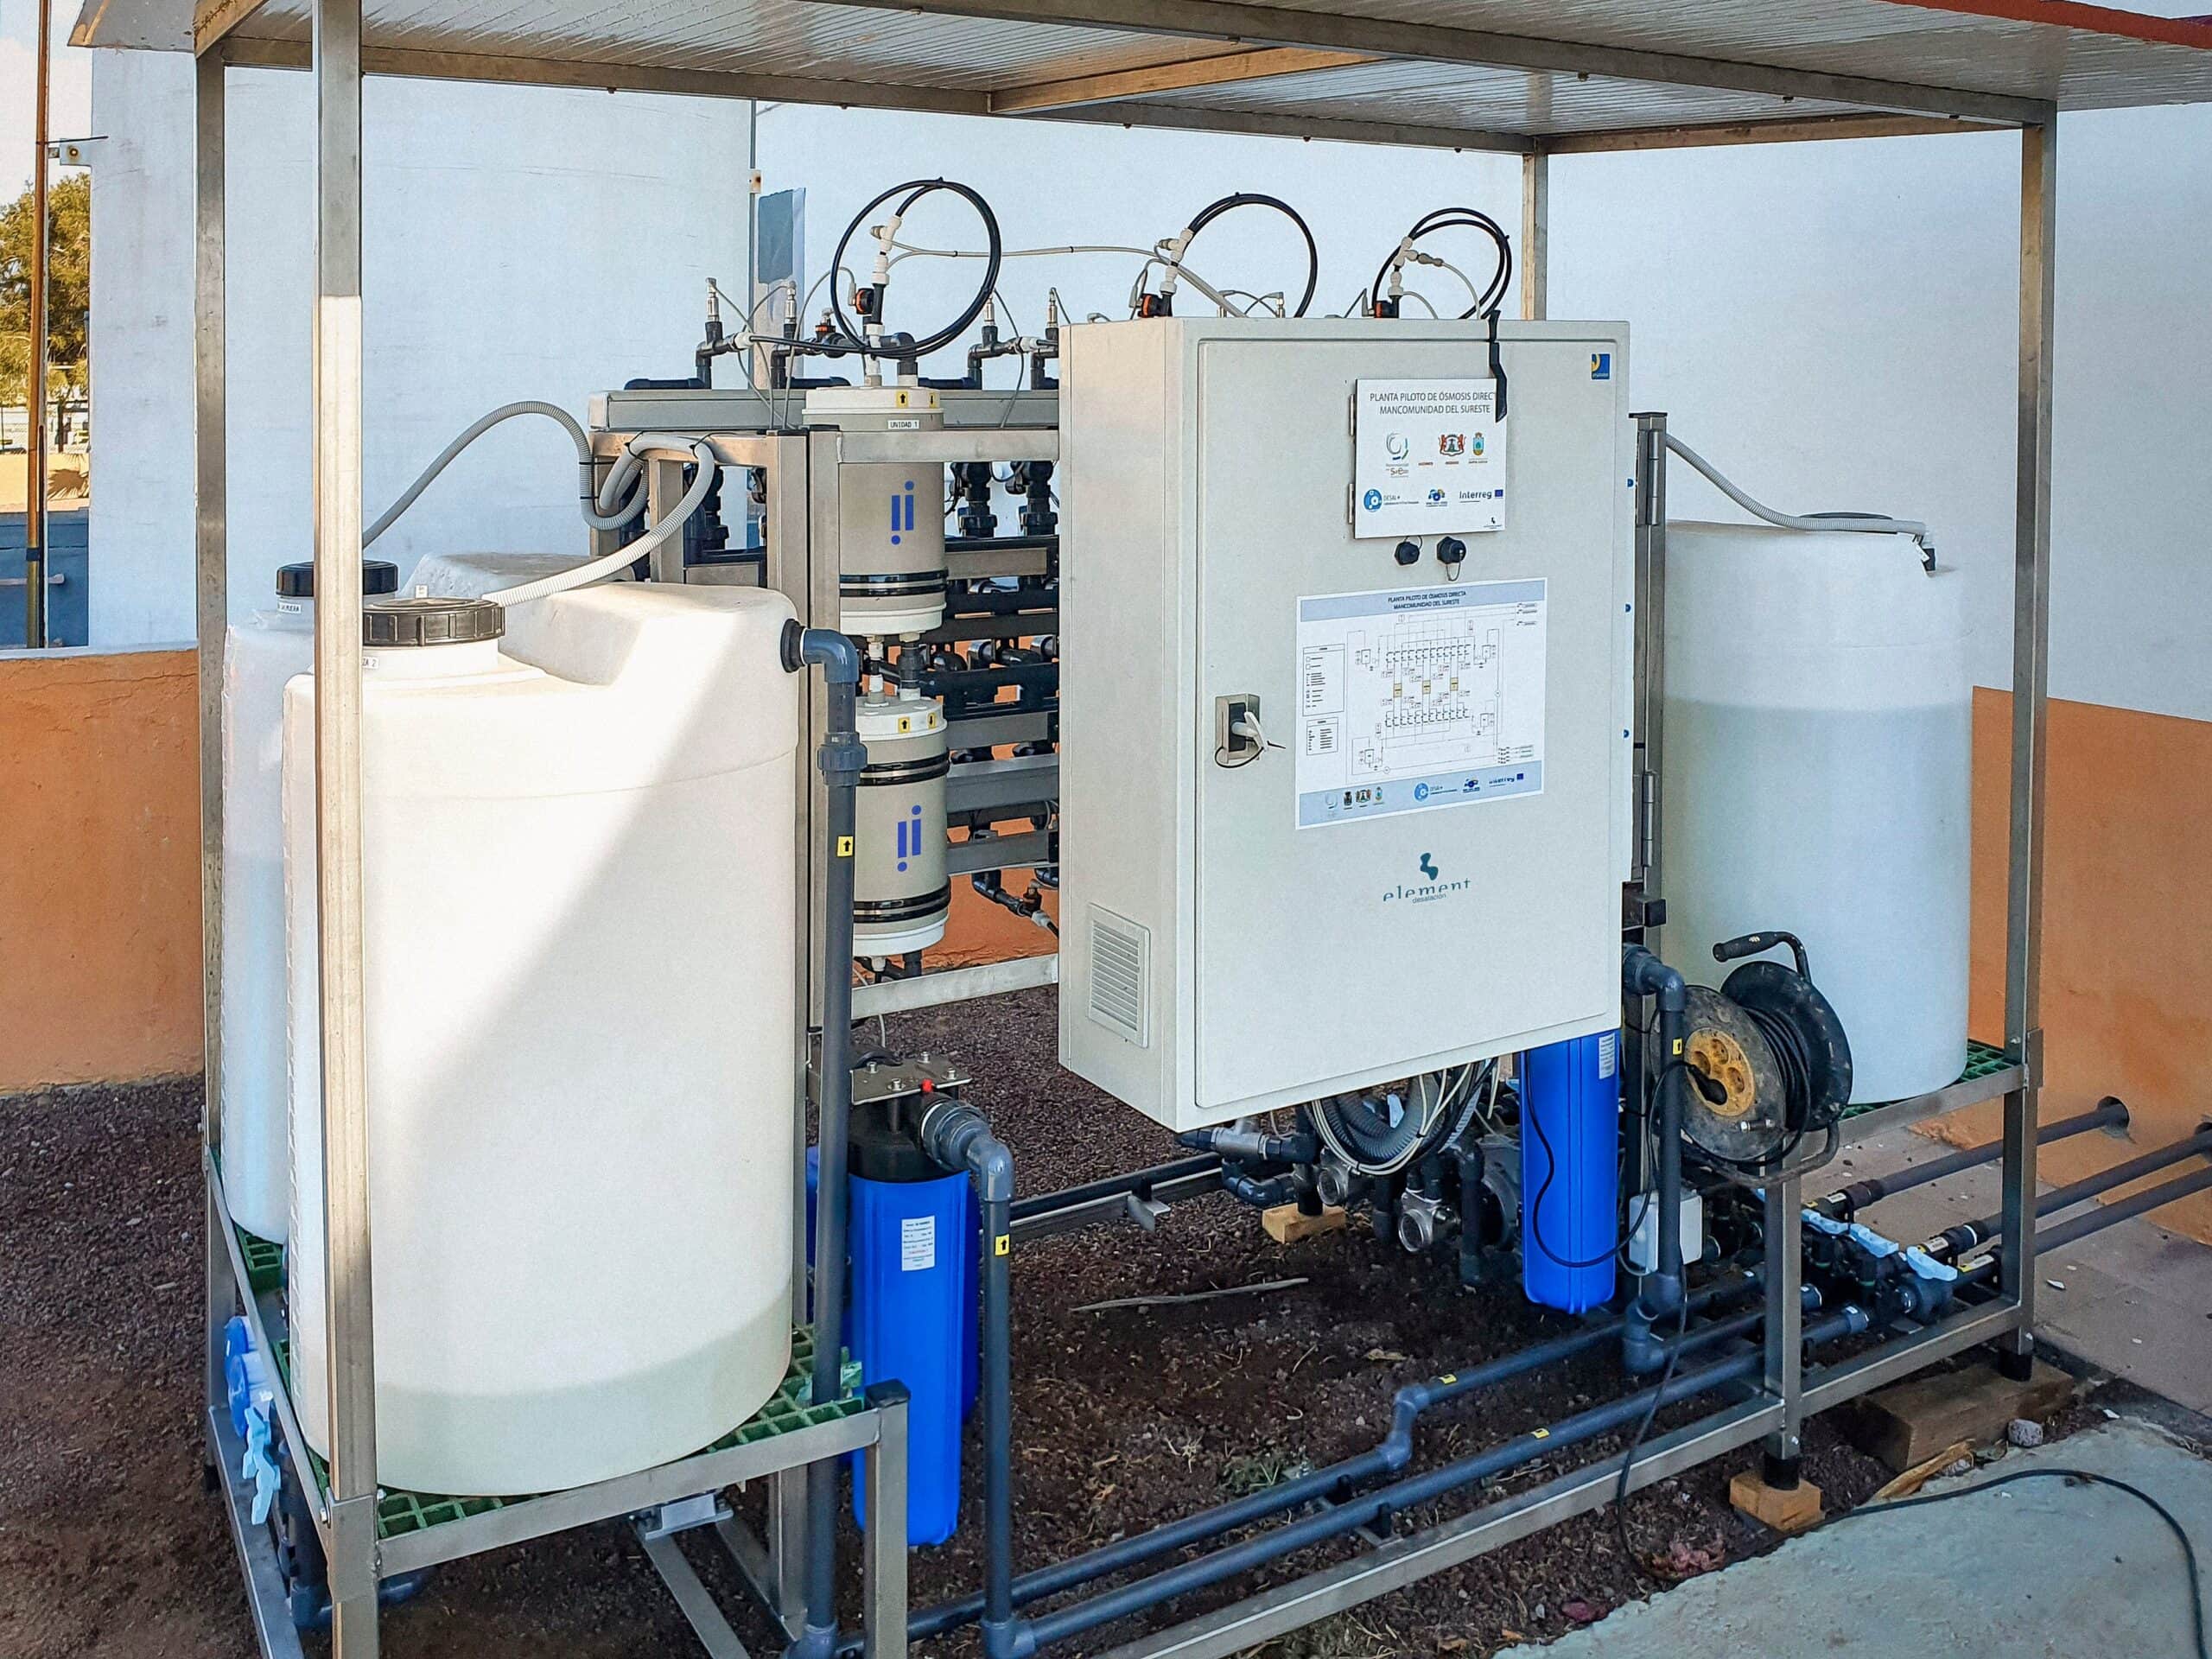 Aquaporin collaborates on novel desalination and wastewater pilot project